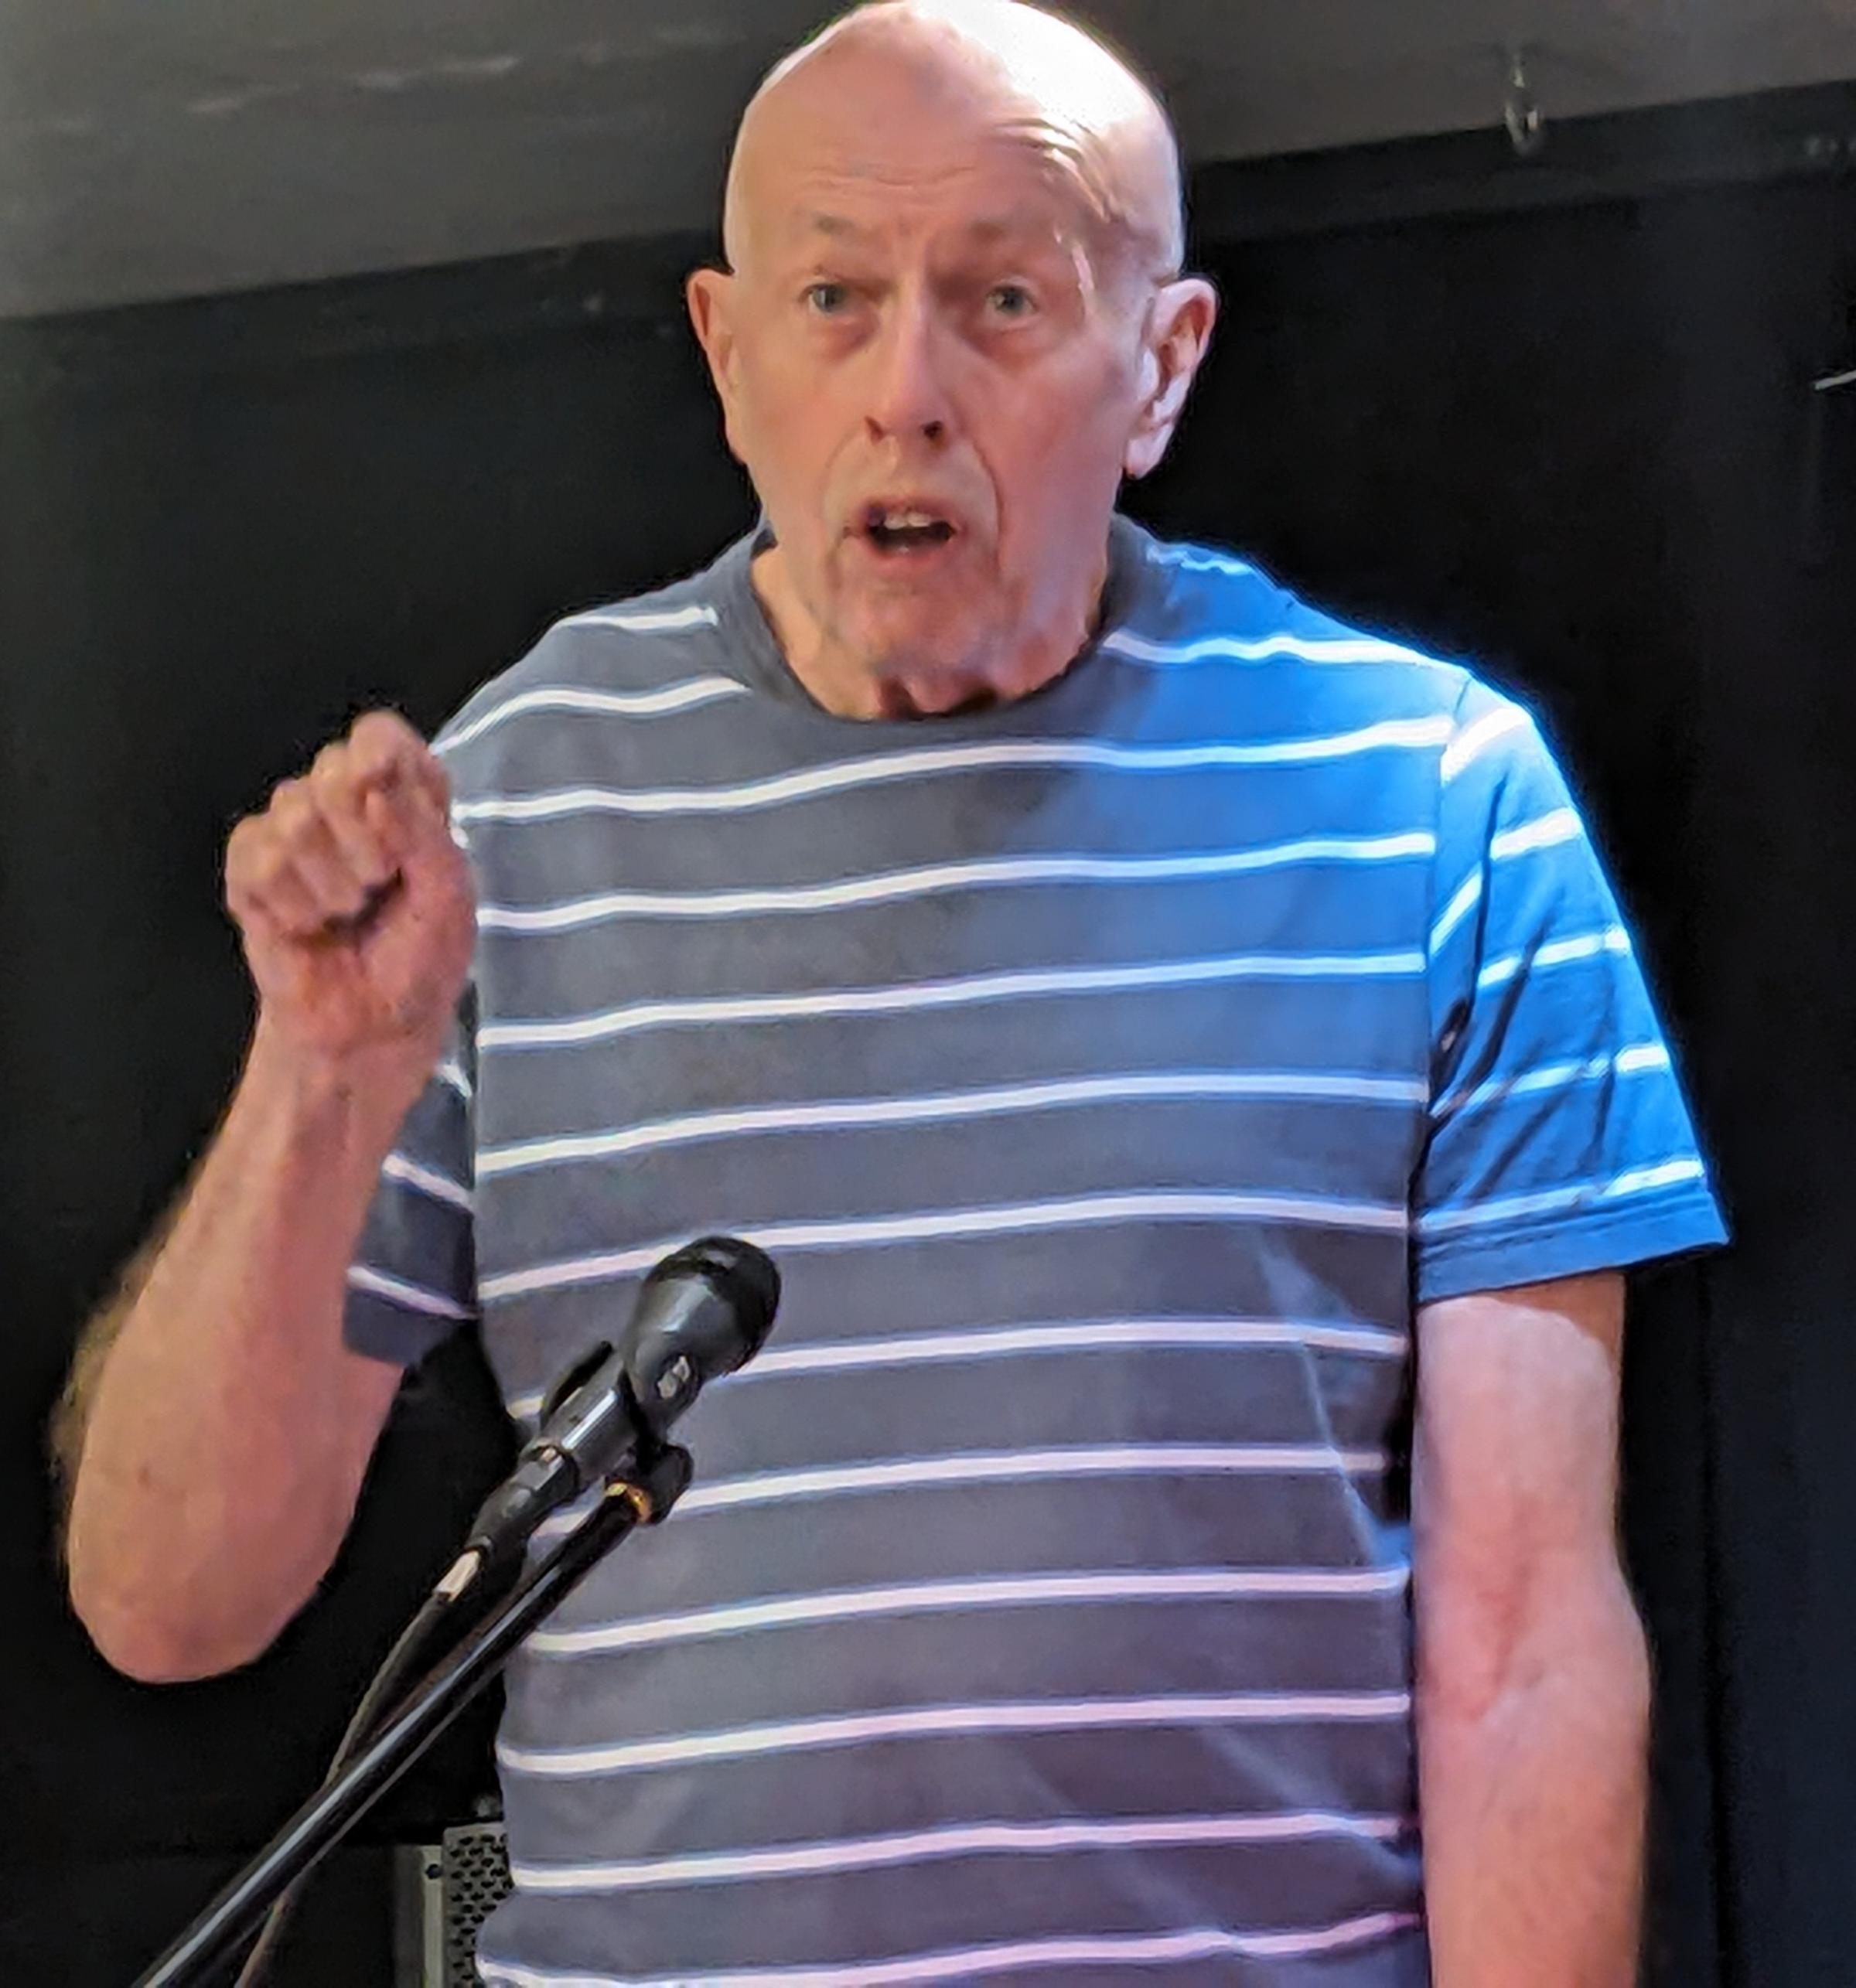 Brian Debus, standing in for Trade Unionist and Socialist Coaltion candidate at mayoral hustings. Pic Julia Gregory, free for use by partners of BBC news wire service